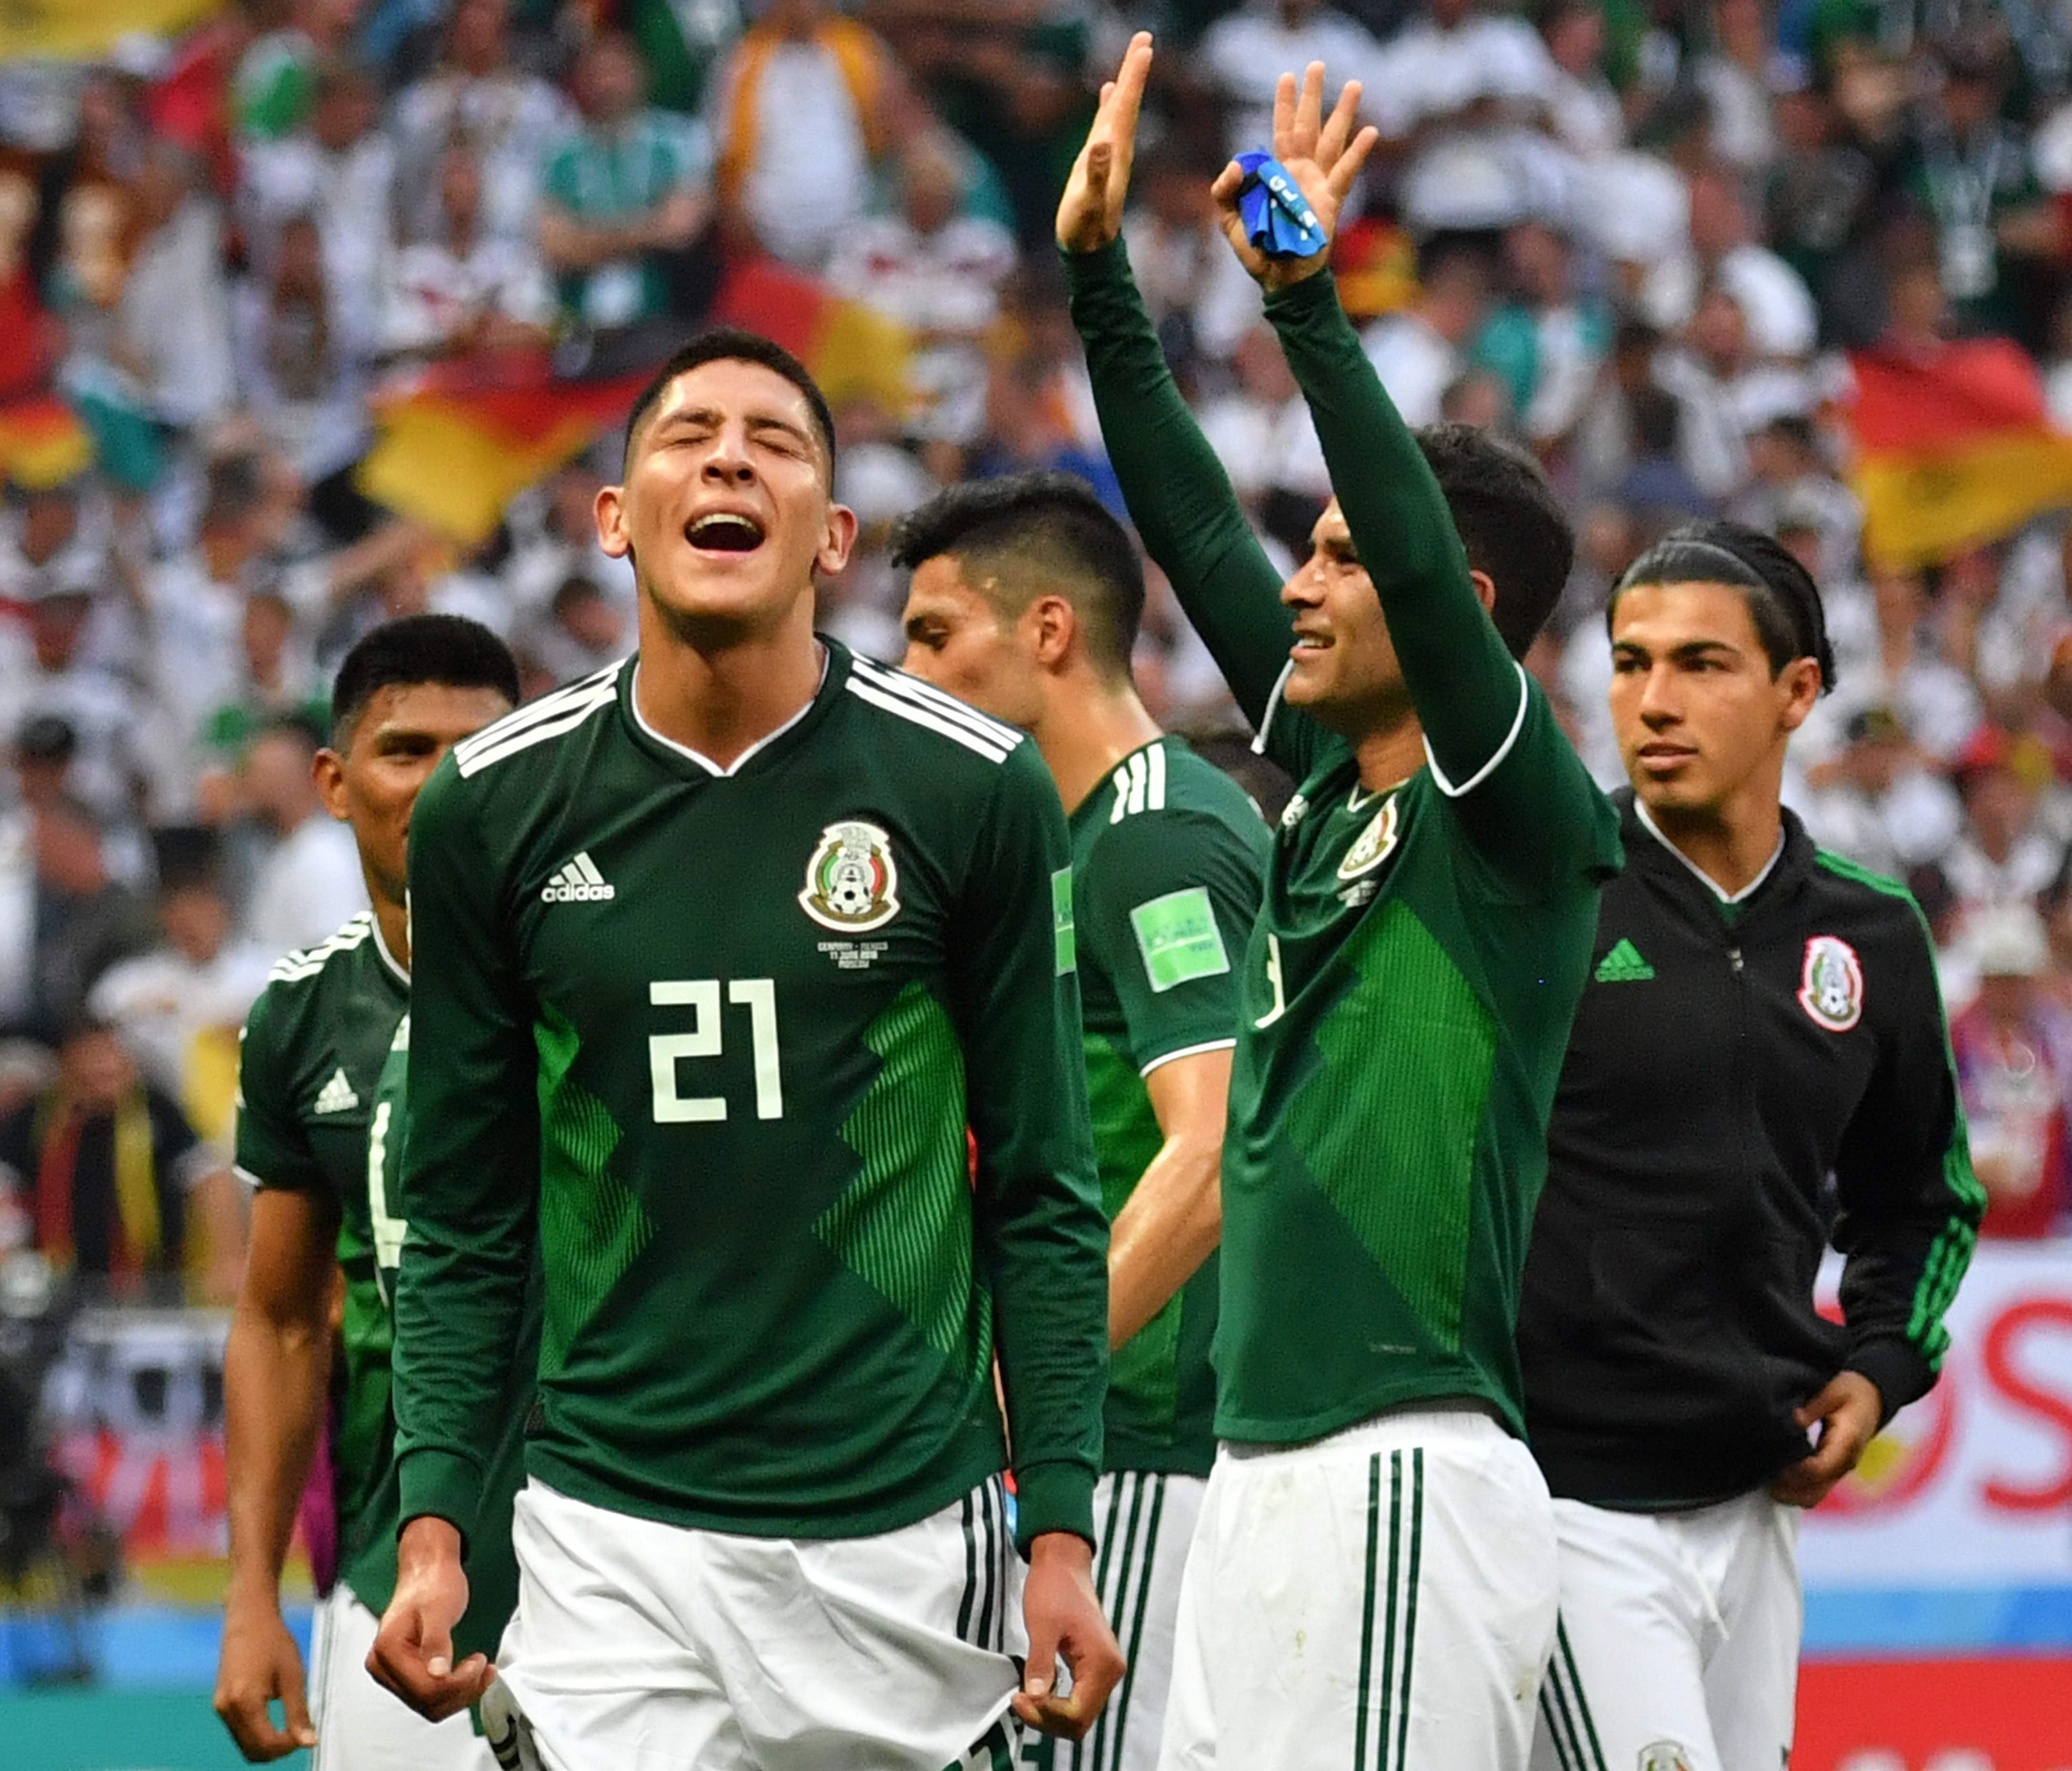 Mexico's defender Edson Alvarez (left) and teammates celebrate their 1-0 victory at the end of the 2018 World Cup Group F match against Germany at the Luzhniki Stadium in Moscow on June 17.